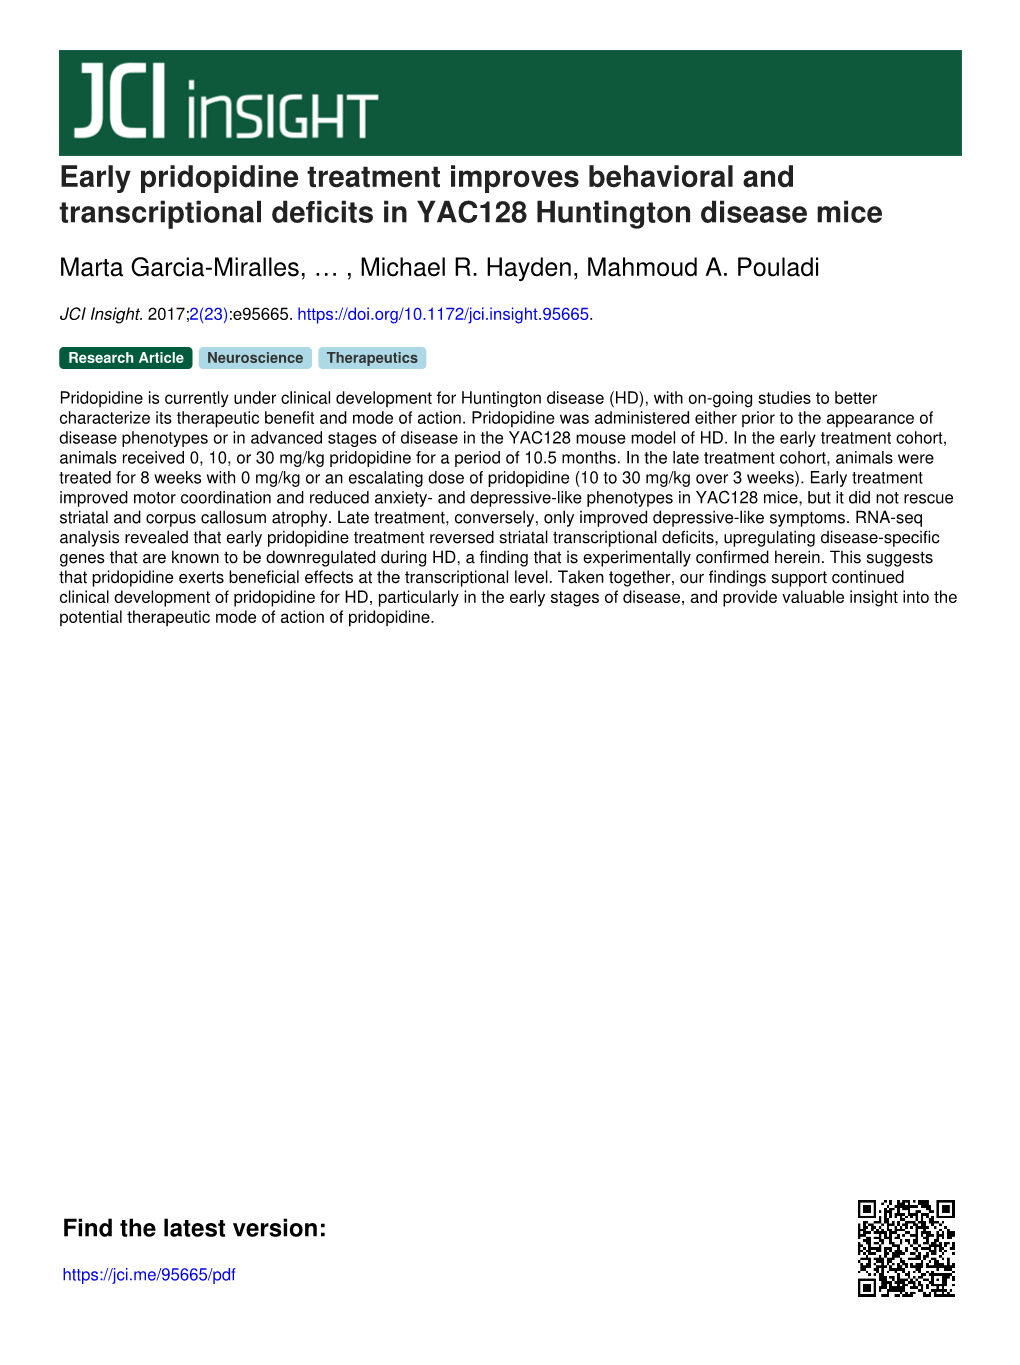 Early Pridopidine Treatment Improves Behavioral and Transcriptional Deficits in YAC128 Huntington Disease Mice